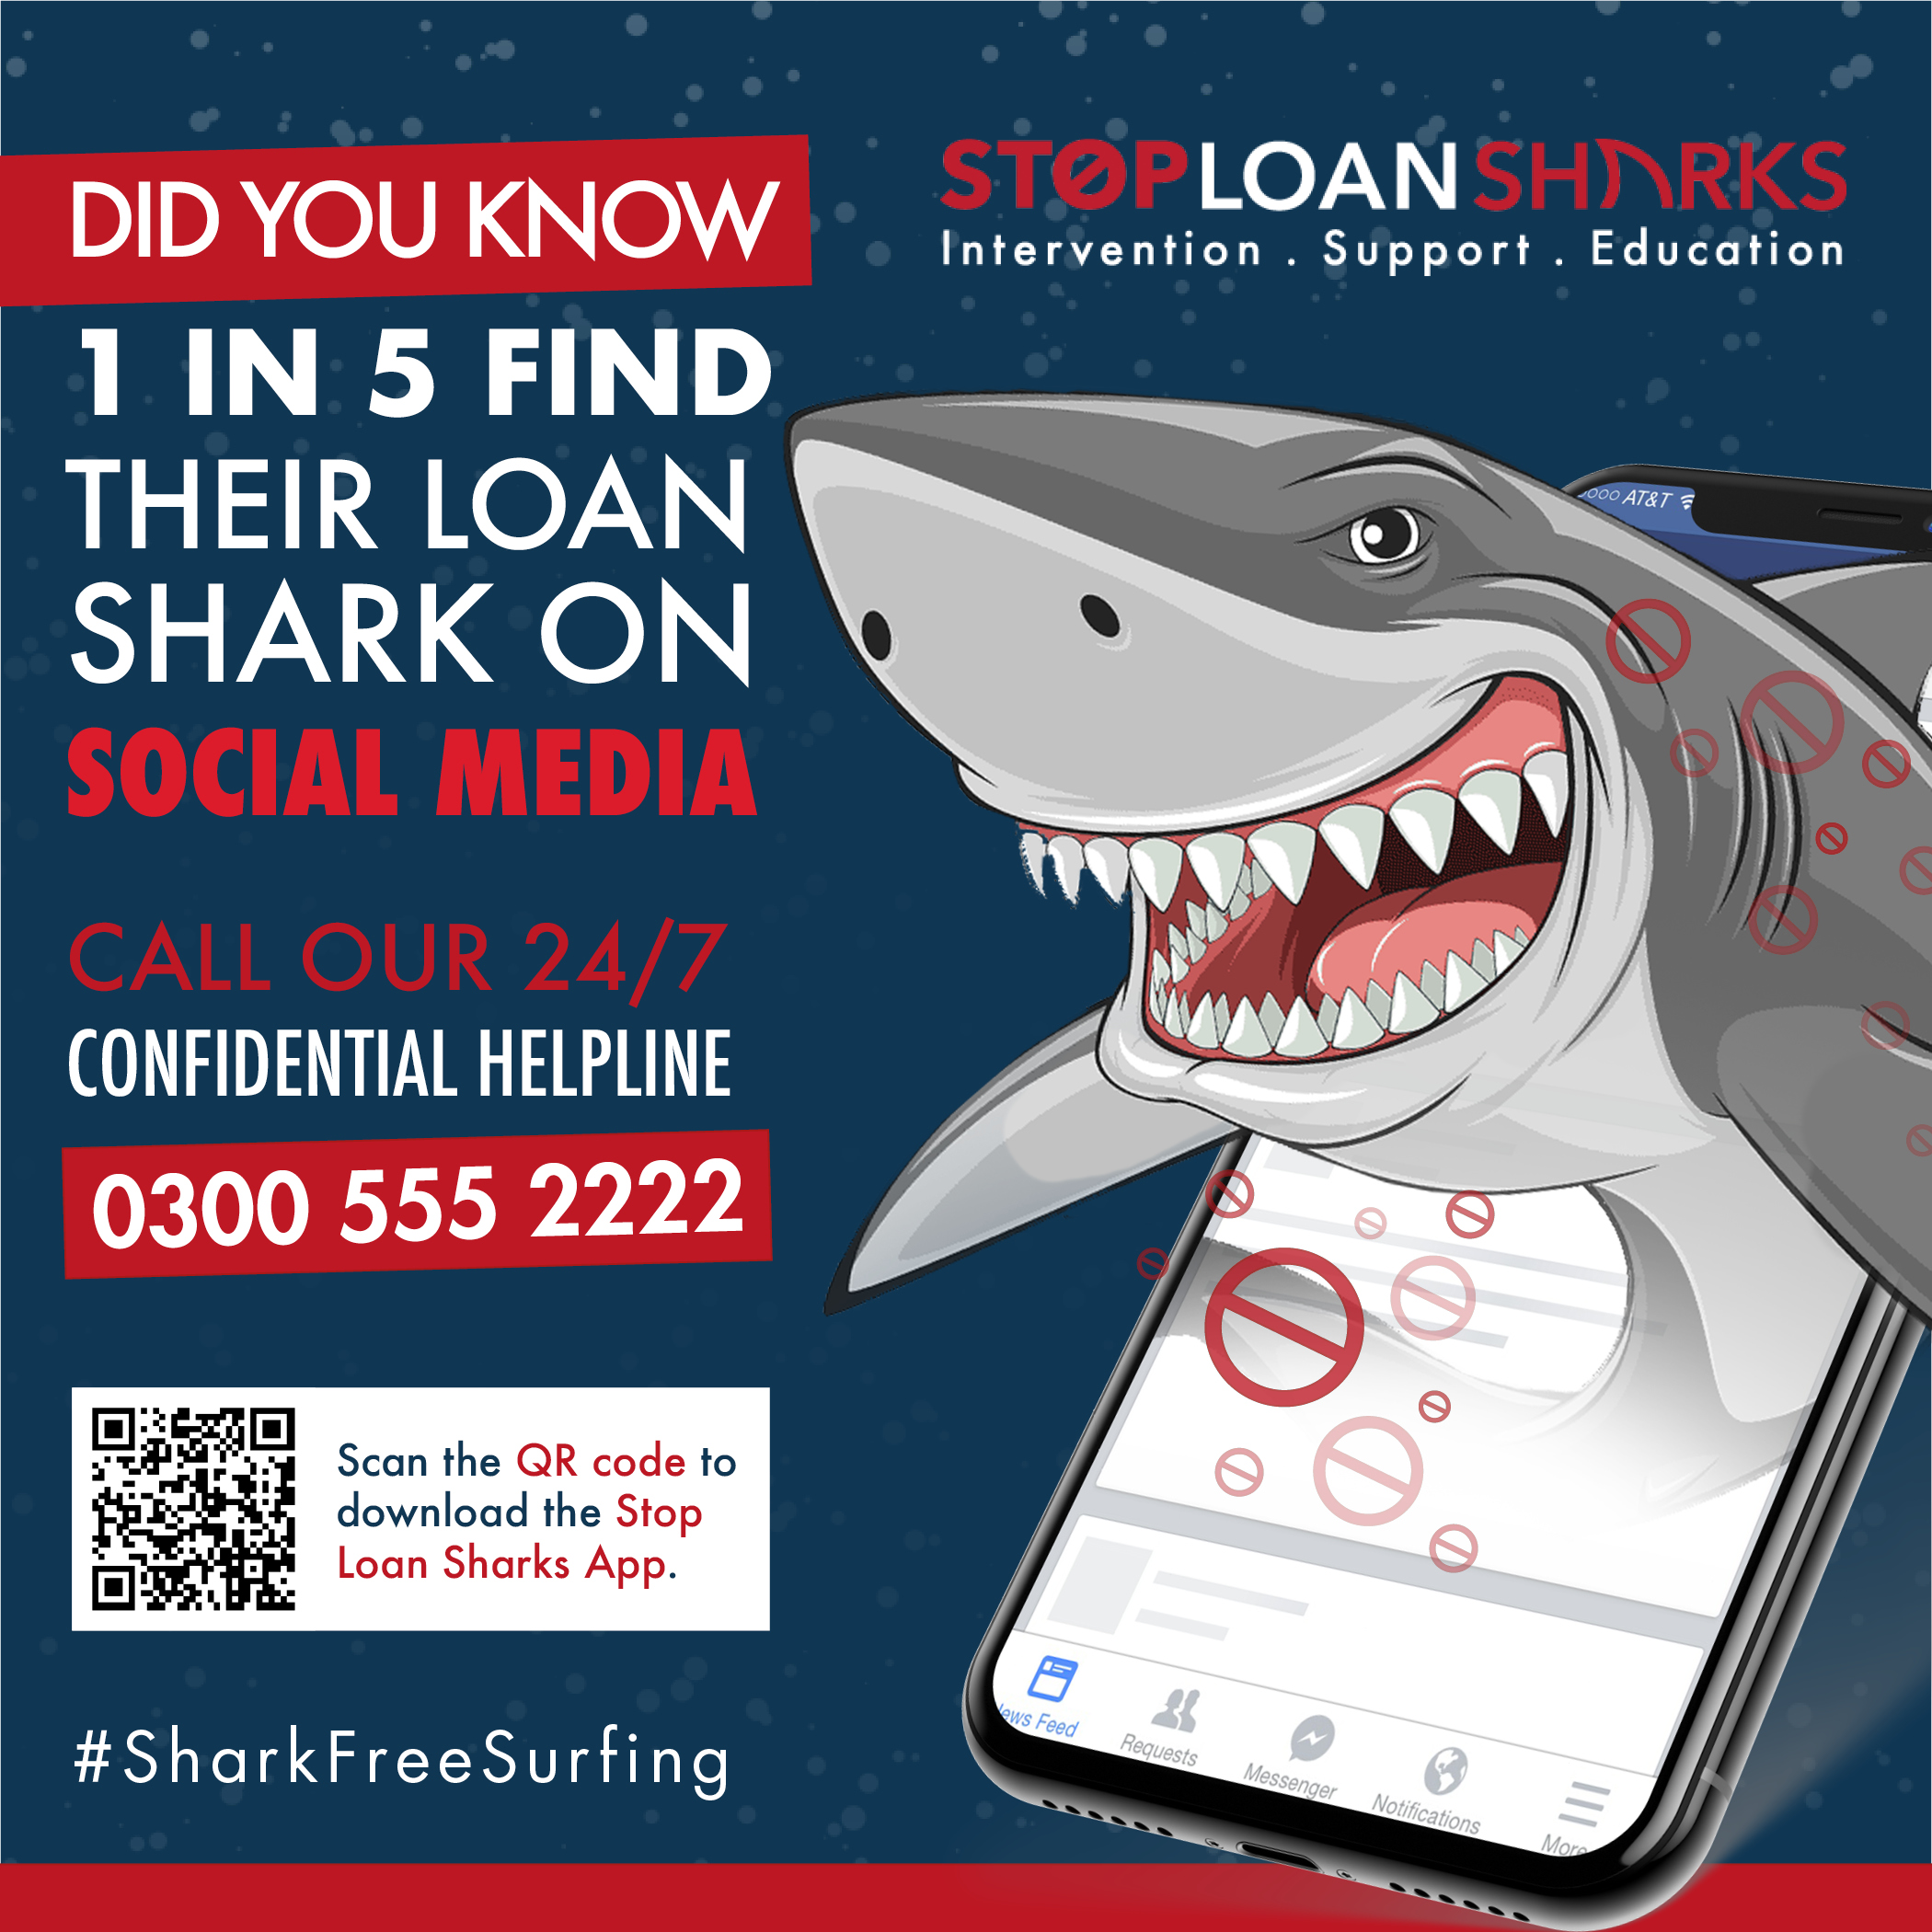 New Campaign Launched To Tackle Online Loan Sharks Stop Loan Sharks